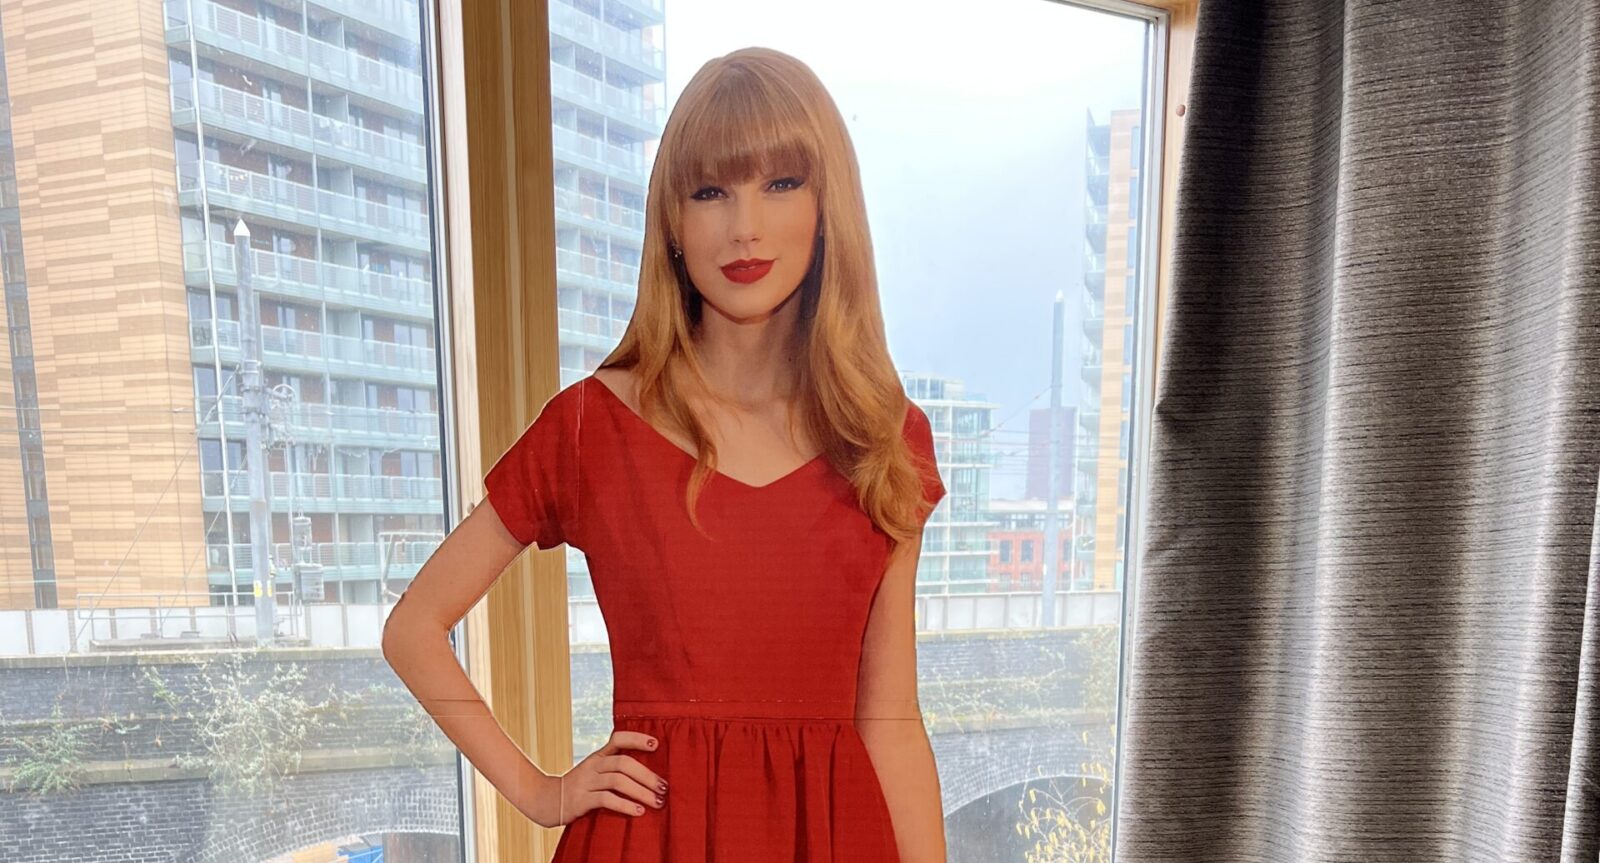 The Manc on X: Meanwhile in #Manchester Another Taylor Swift